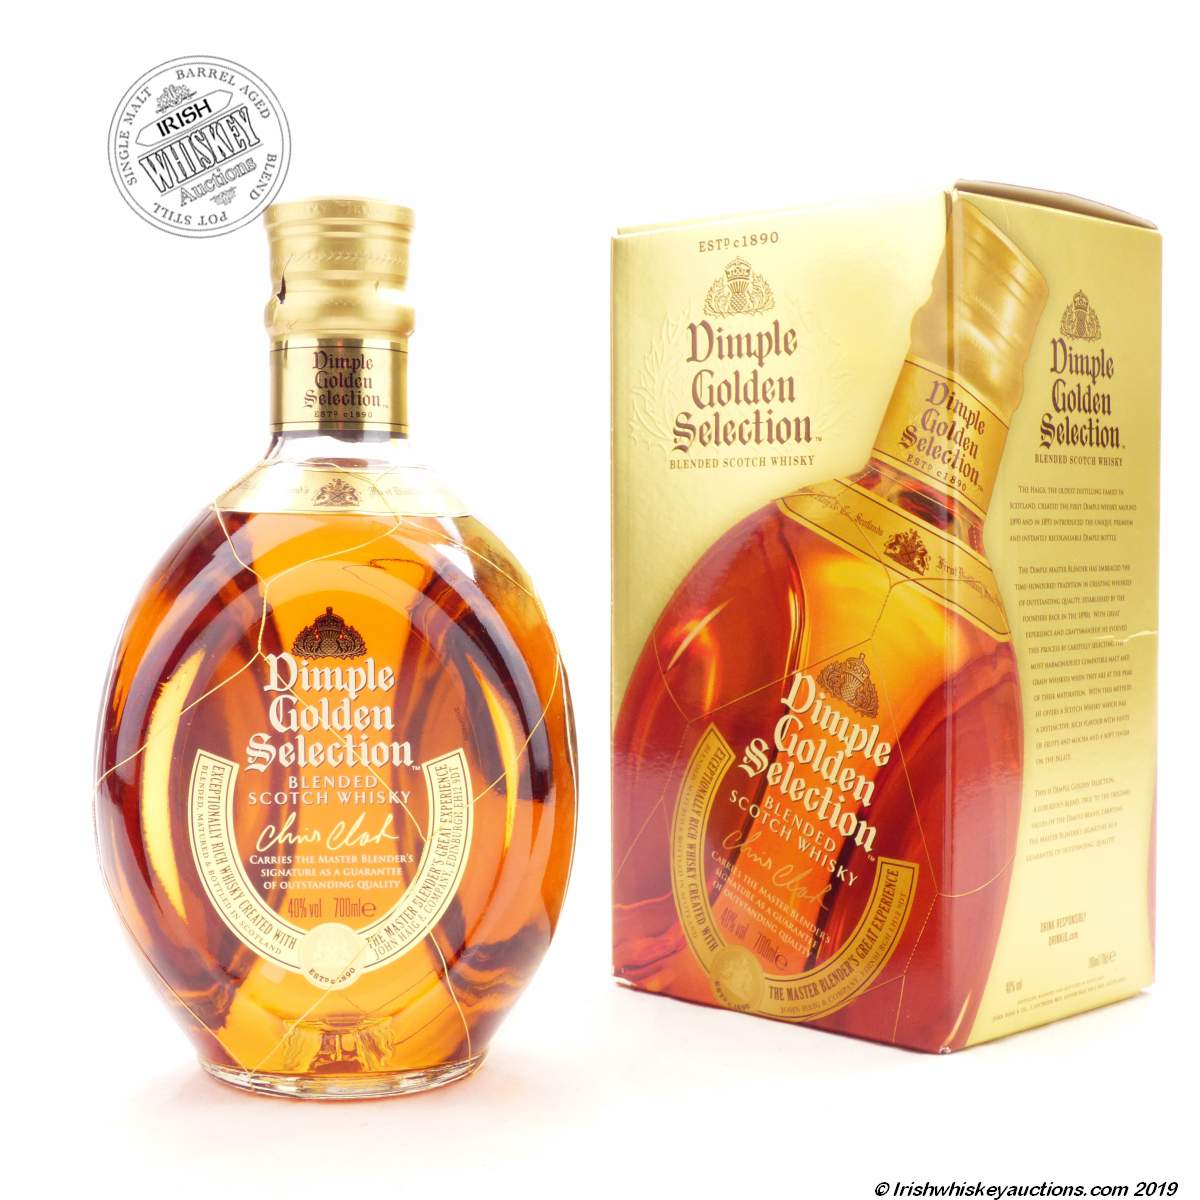 Whiskey Whisky Irish Auctions Blended Selection Golden Scotch | Dimple